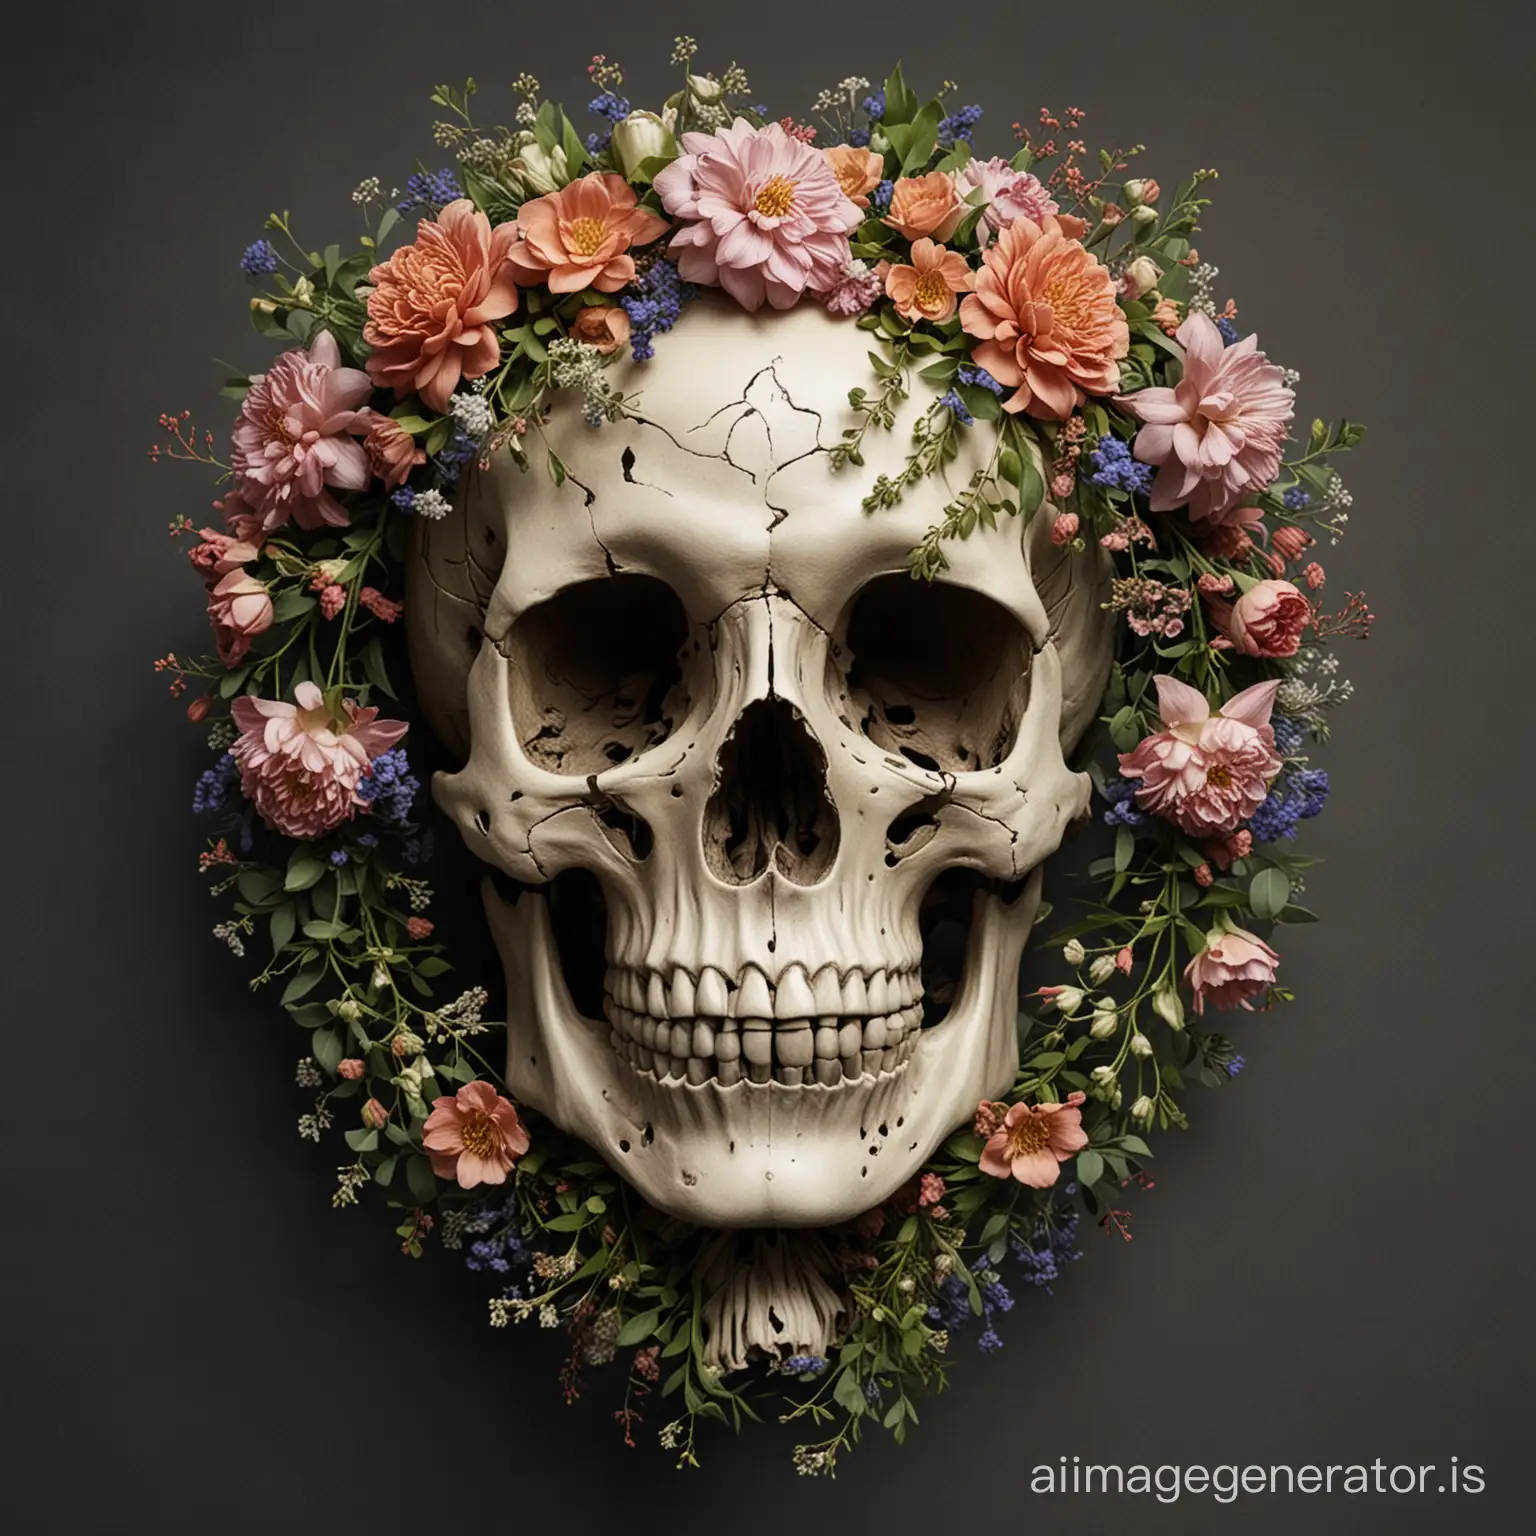 The skeleton head around which flowers are entwined.